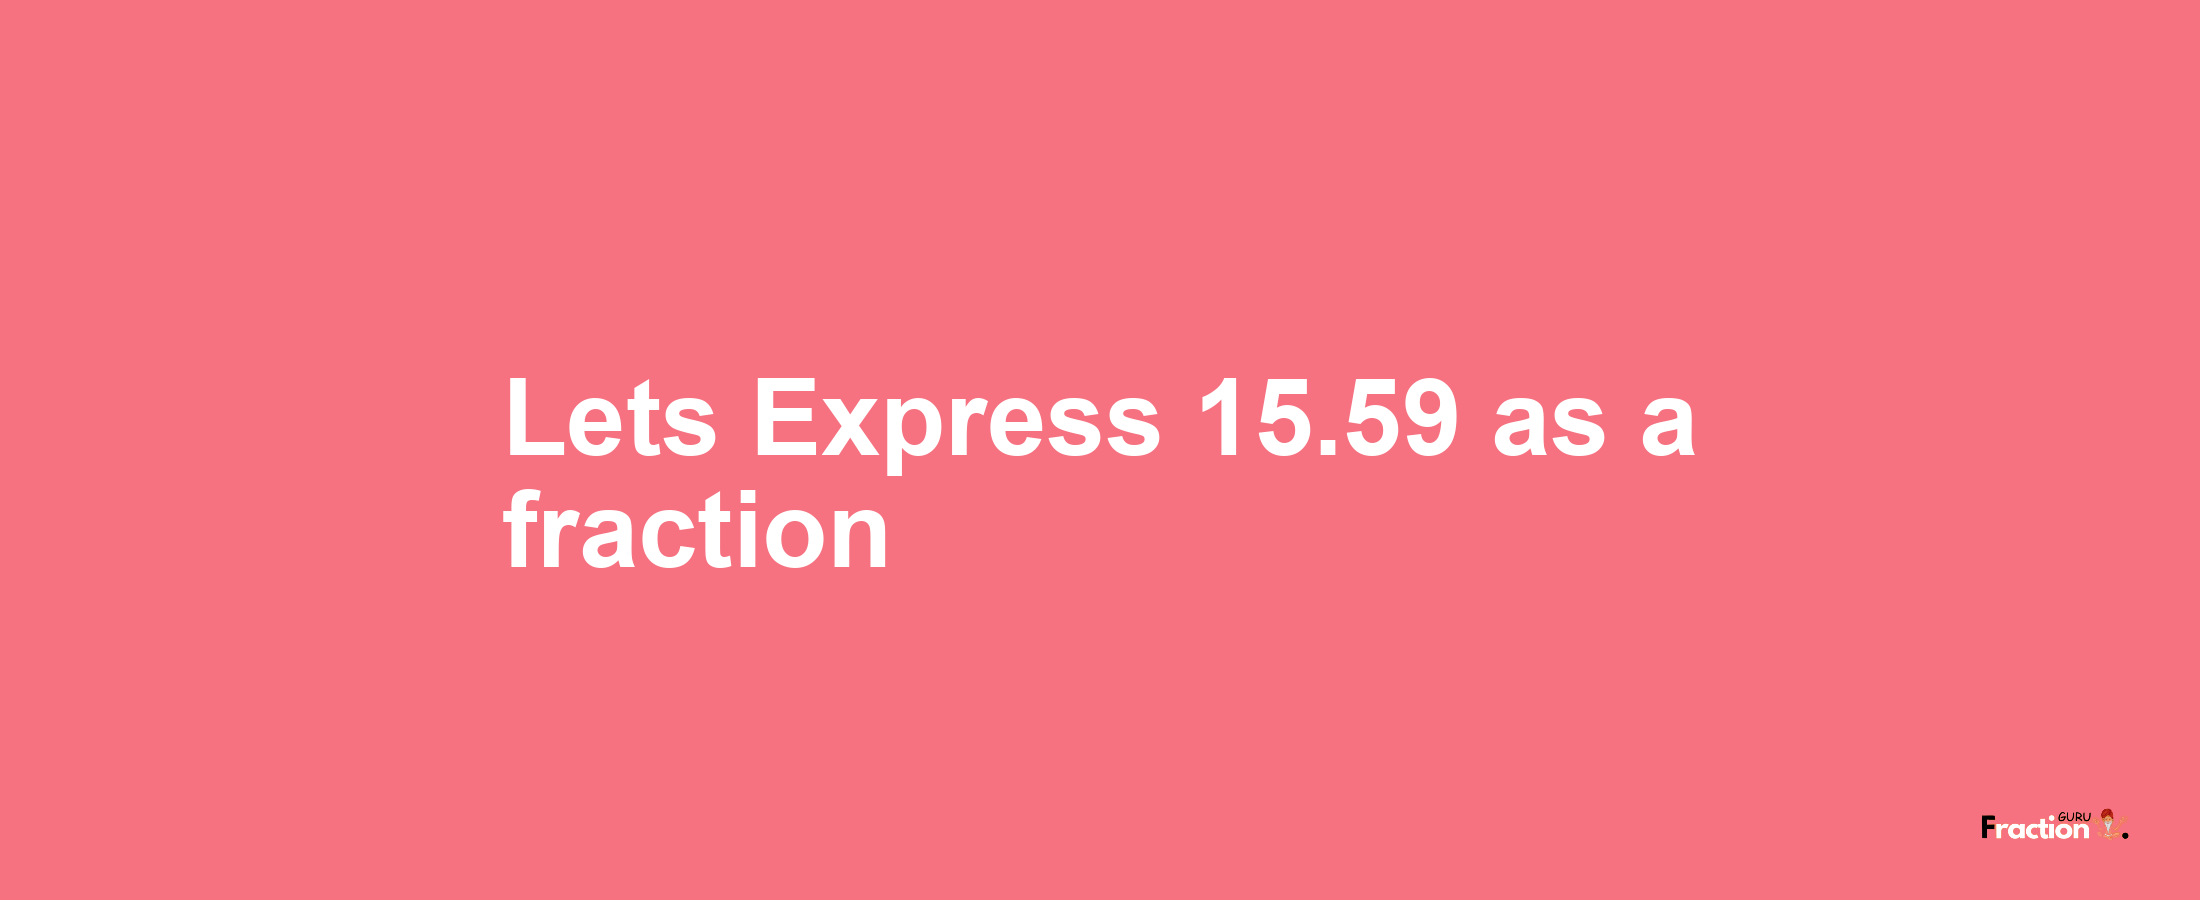 Lets Express 15.59 as afraction